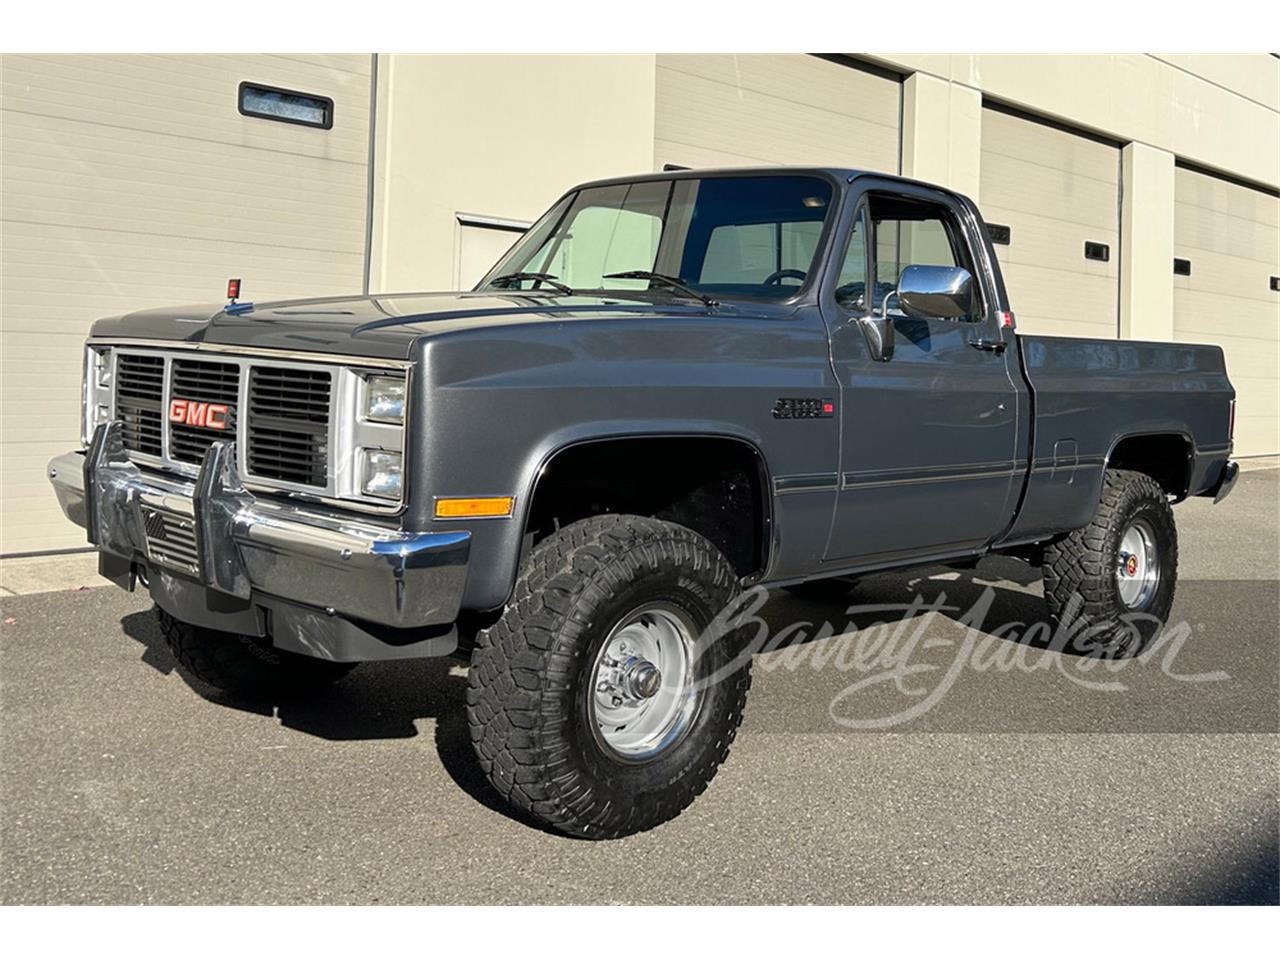 For Sale at Auction: 1987 GMC Sierra 1500 in Scottsdale, Arizona for sale in Scottsdale, AZ